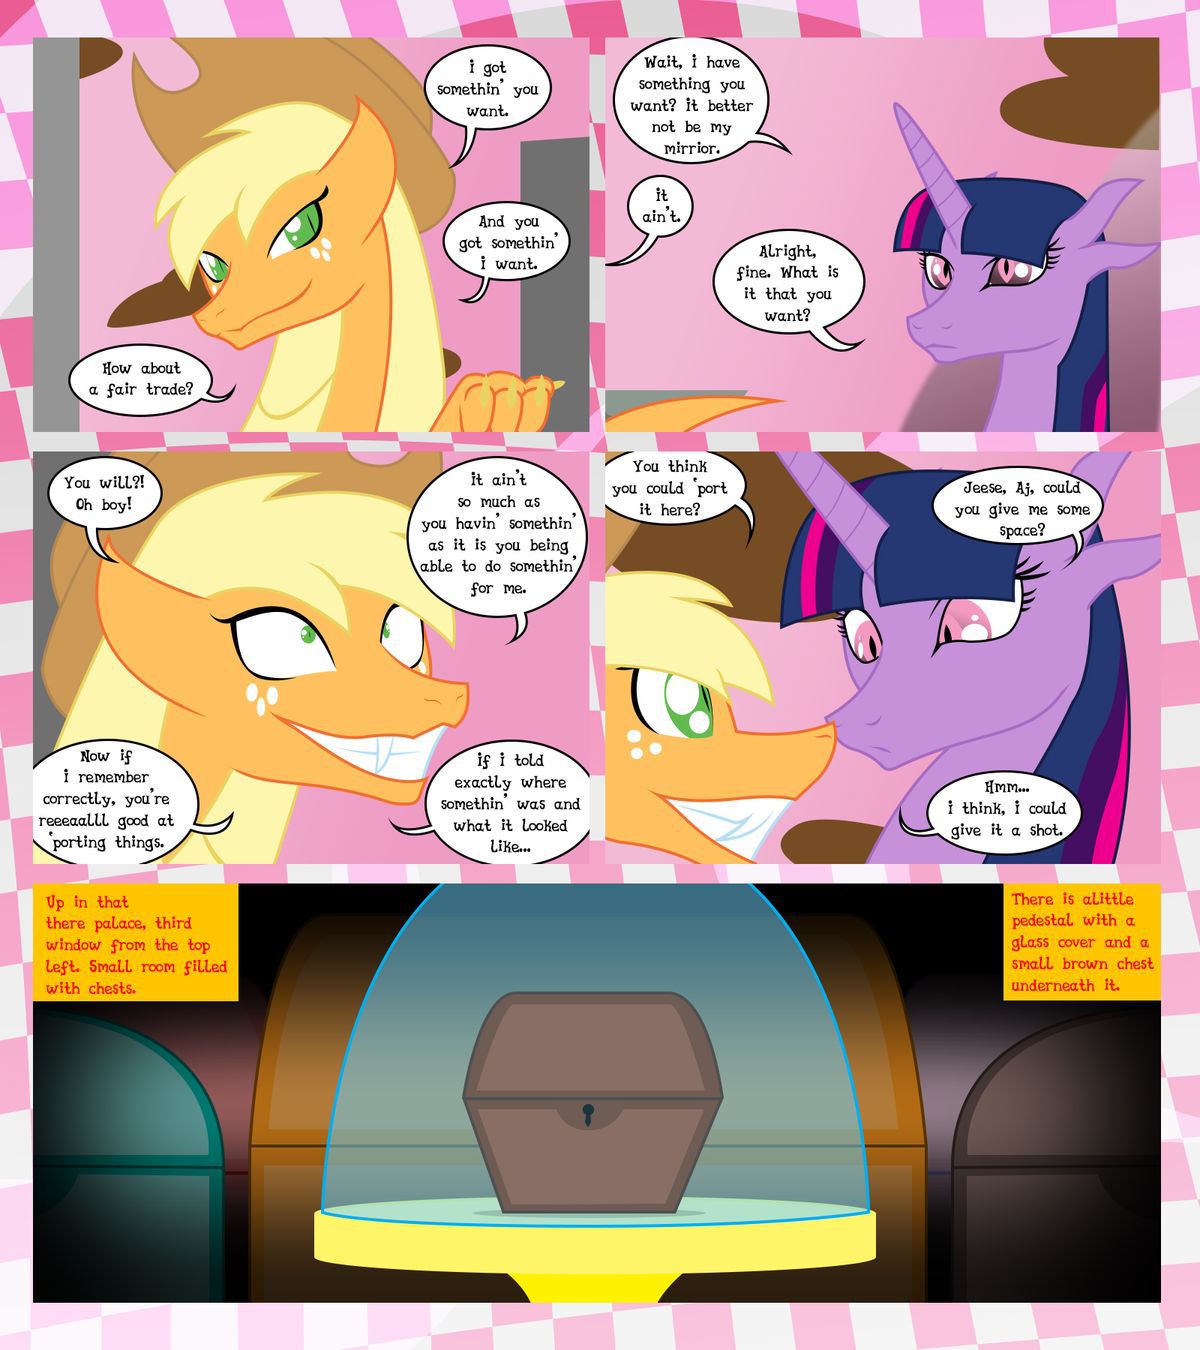 [GatesMcCloud] Cutie Mark Crusaders 10k: Chapter 3 - The Lost (My Little Pony: Friendship is Magic) [English] [Ongoing] 54